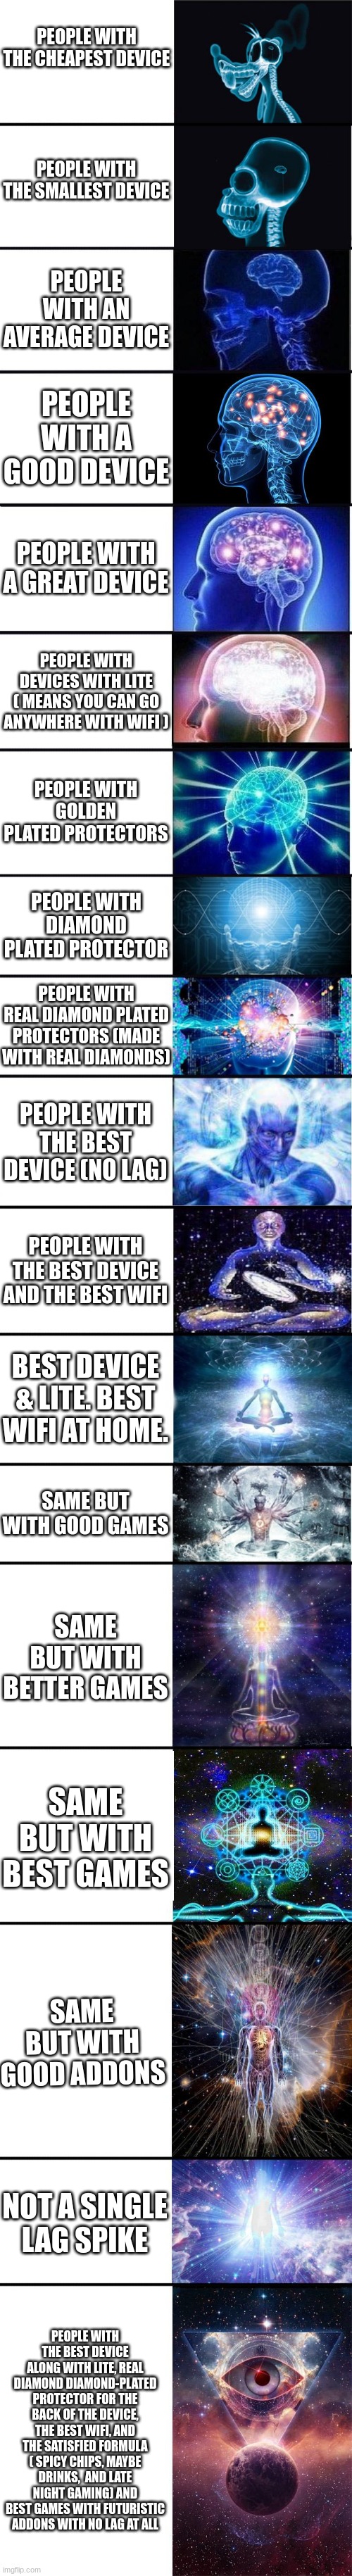 expanding brain: 9001 | PEOPLE WITH THE CHEAPEST DEVICE; PEOPLE WITH THE SMALLEST DEVICE; PEOPLE WITH AN AVERAGE DEVICE; PEOPLE WITH A GOOD DEVICE; PEOPLE WITH A GREAT DEVICE; PEOPLE WITH DEVICES WITH LITE ( MEANS YOU CAN GO ANYWHERE WITH WIFI ); PEOPLE WITH GOLDEN PLATED PROTECTORS; PEOPLE WITH DIAMOND PLATED PROTECTOR; PEOPLE WITH REAL DIAMOND PLATED PROTECTORS (MADE WITH REAL DIAMONDS); PEOPLE WITH THE BEST DEVICE (NO LAG); PEOPLE WITH THE BEST DEVICE AND THE BEST WIFI; BEST DEVICE & LITE. BEST WIFI AT HOME. SAME BUT WITH GOOD GAMES; SAME BUT WITH BETTER GAMES; SAME BUT WITH BEST GAMES; SAME BUT WITH GOOD ADDONS; NOT A SINGLE LAG SPIKE; PEOPLE WITH THE BEST DEVICE ALONG WITH LITE, REAL DIAMOND DIAMOND-PLATED PROTECTOR FOR THE BACK OF THE DEVICE, THE BEST WIFI, AND THE SATISFIED FORMULA ( SPICY CHIPS, MAYBE DRINKS,  AND LATE NIGHT GAMING) AND BEST GAMES WITH FUTURISTIC ADDONS WITH NO LAG AT ALL | image tagged in expanding brain 9001 | made w/ Imgflip meme maker